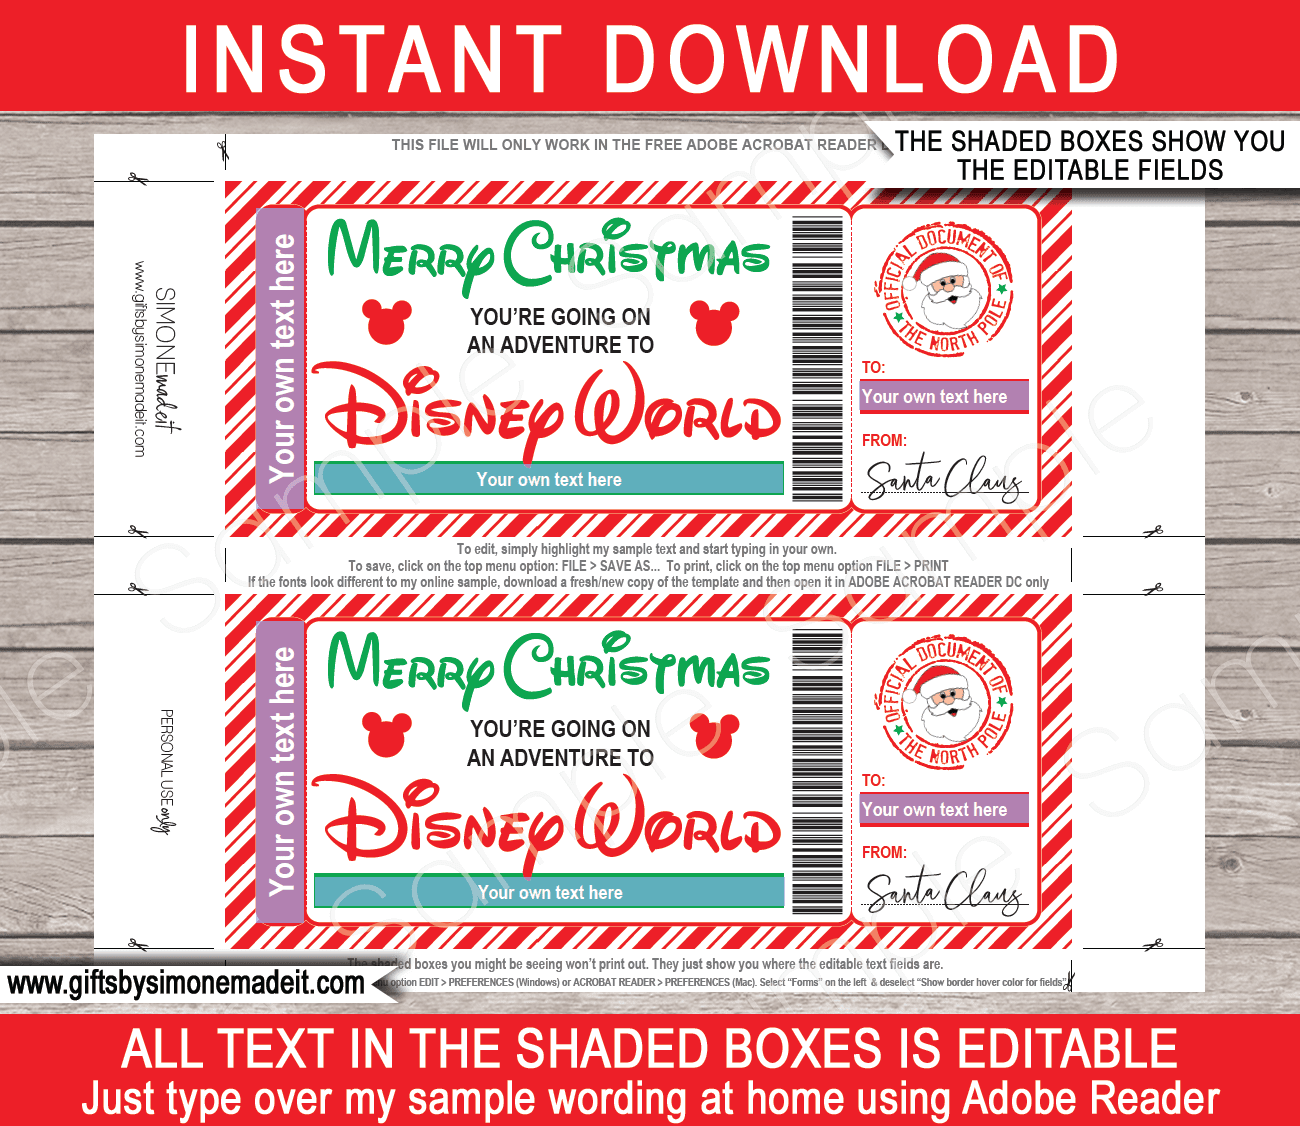 https://www.giftsbysimonemadeit.com/wp-content/uploads/2021/11/Christmas-Disney-World-Tickets-from-Santa-RED-GREEN-editable-text.png